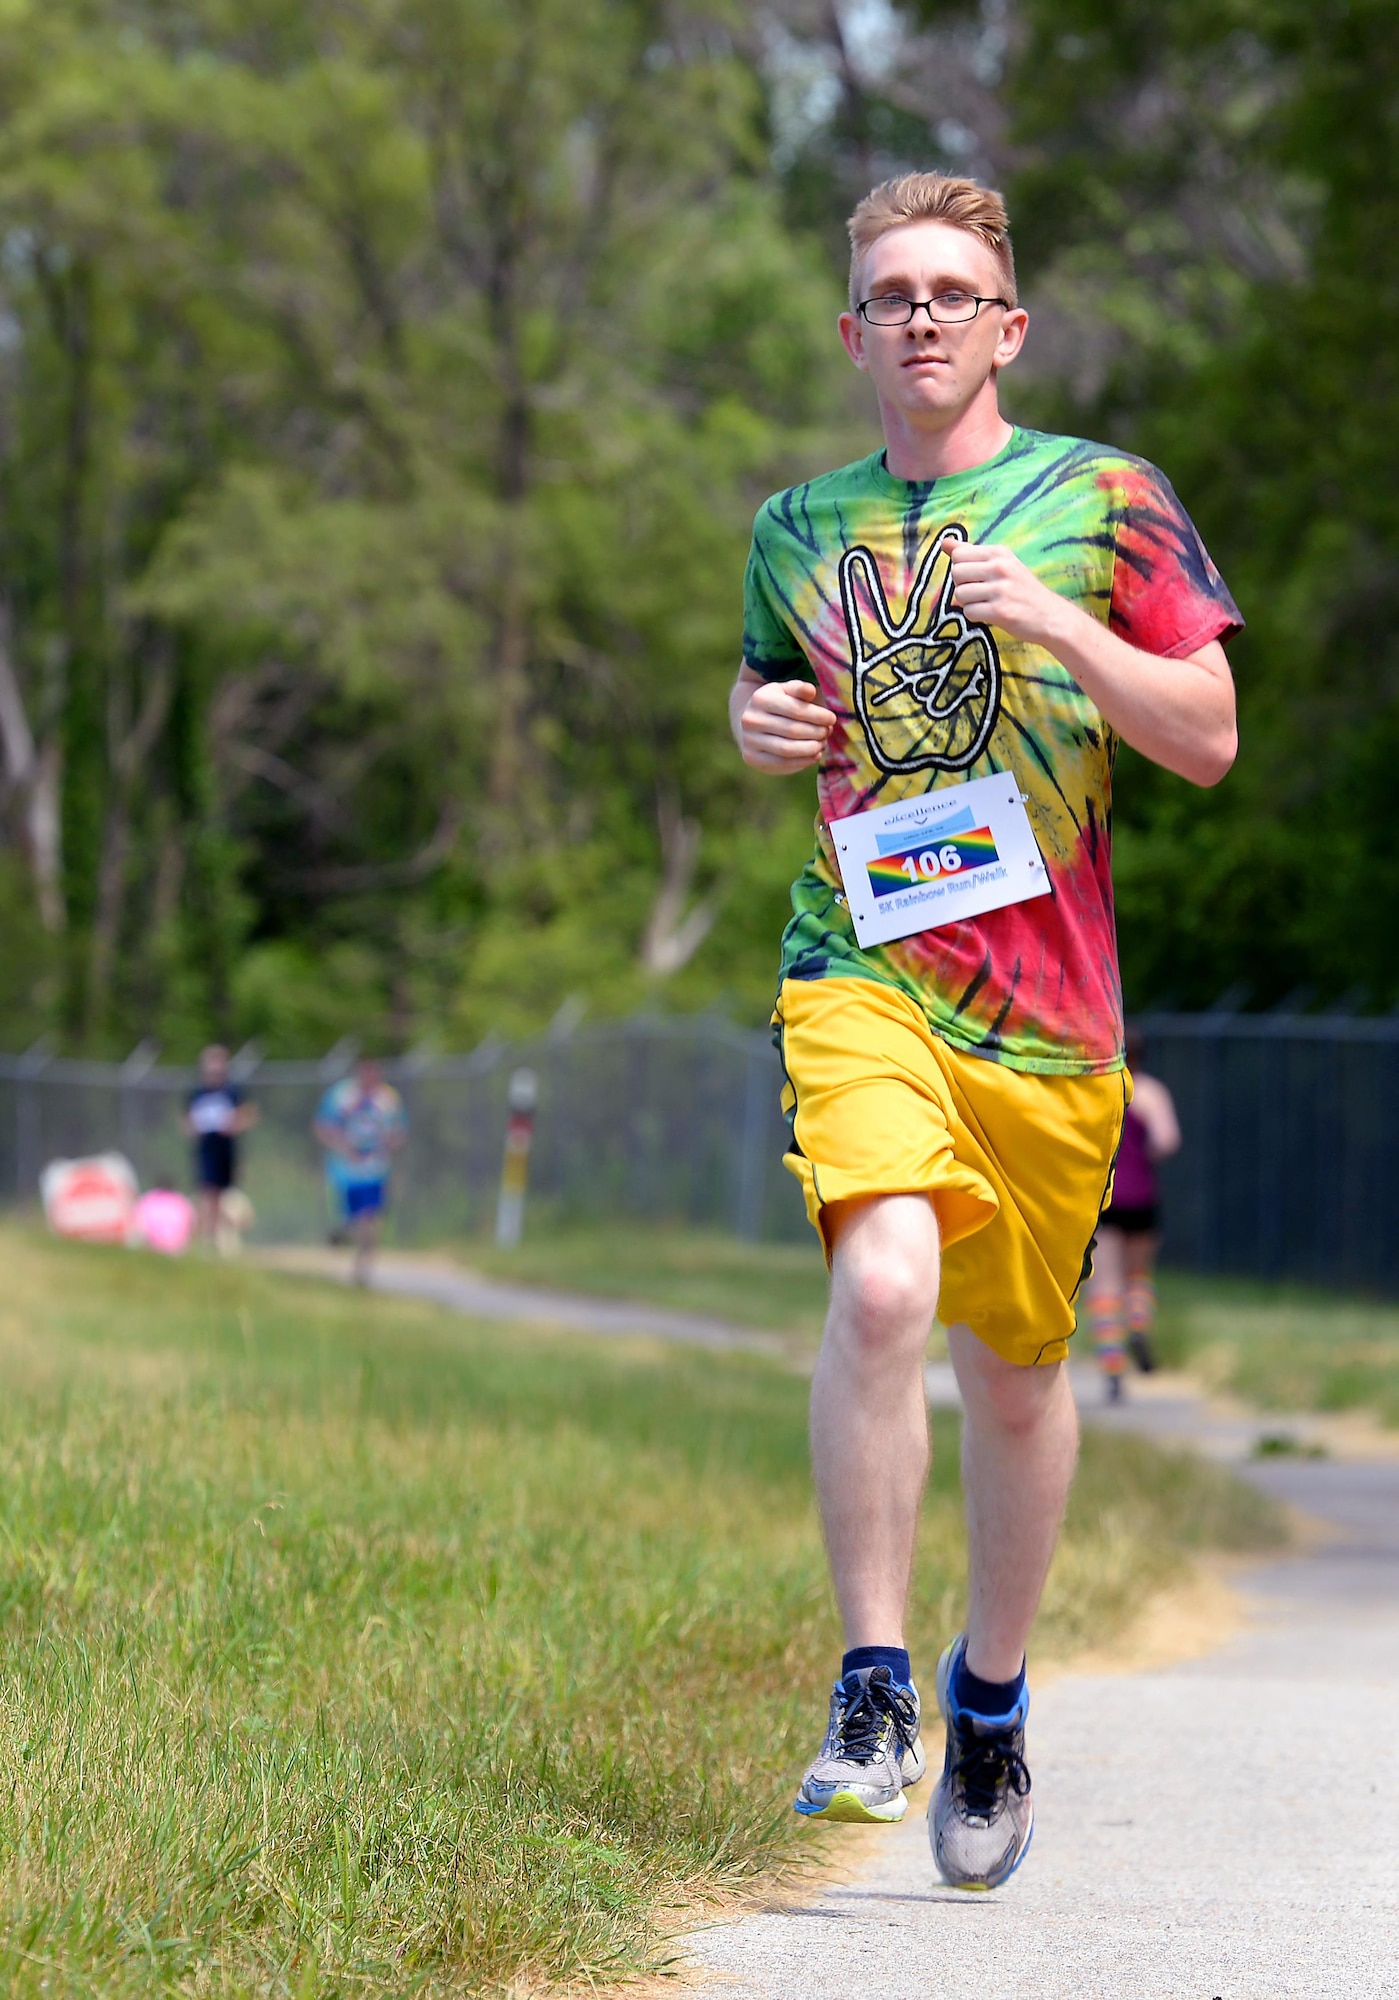 Airman 1st Class Steven Hanners, from the 20th Intelligence Squadron, participates in the Rainbow 5K Run/Walk June 23 at Offutt Air Force Base, Neb. Hanners finished 1st in the run with a time of 17 minutes, 16 seconds. The event was held as part of LGBT pride month to celebrate diversity among DOD members. (U.S. Air Force photo by Delanie Stafford/Released)